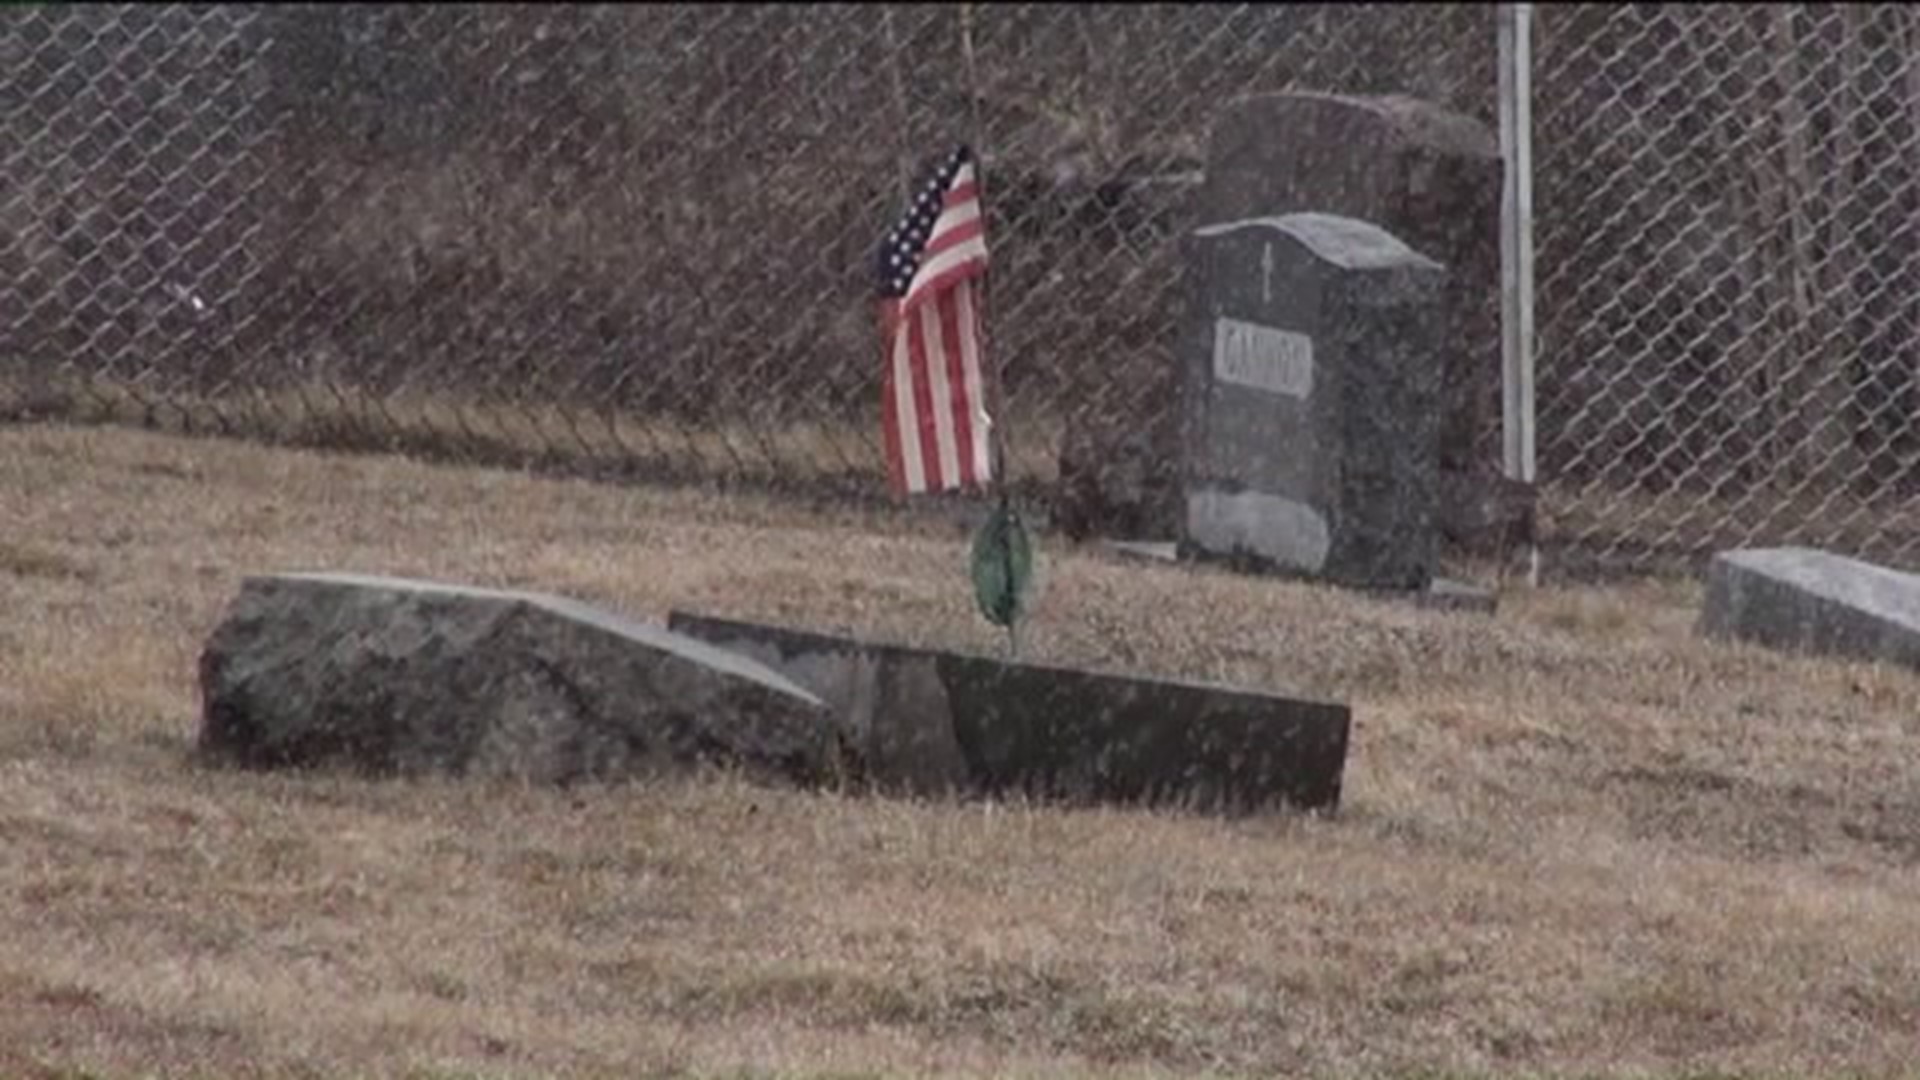 Cemetery Safety after Tragic Accident